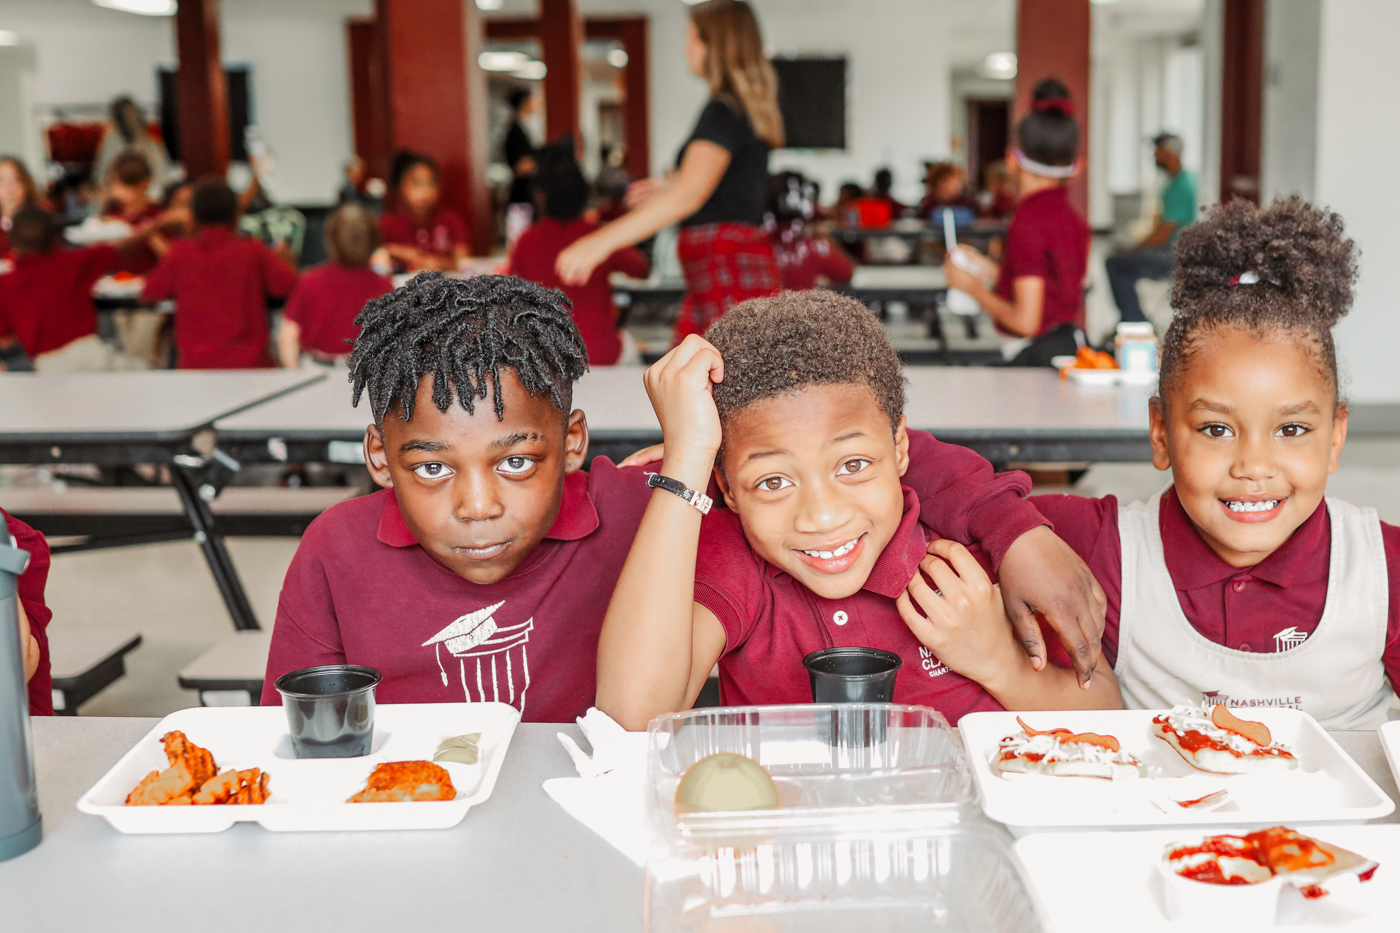 3 kids sit together smiling and enjoying lunch in the cafeteria